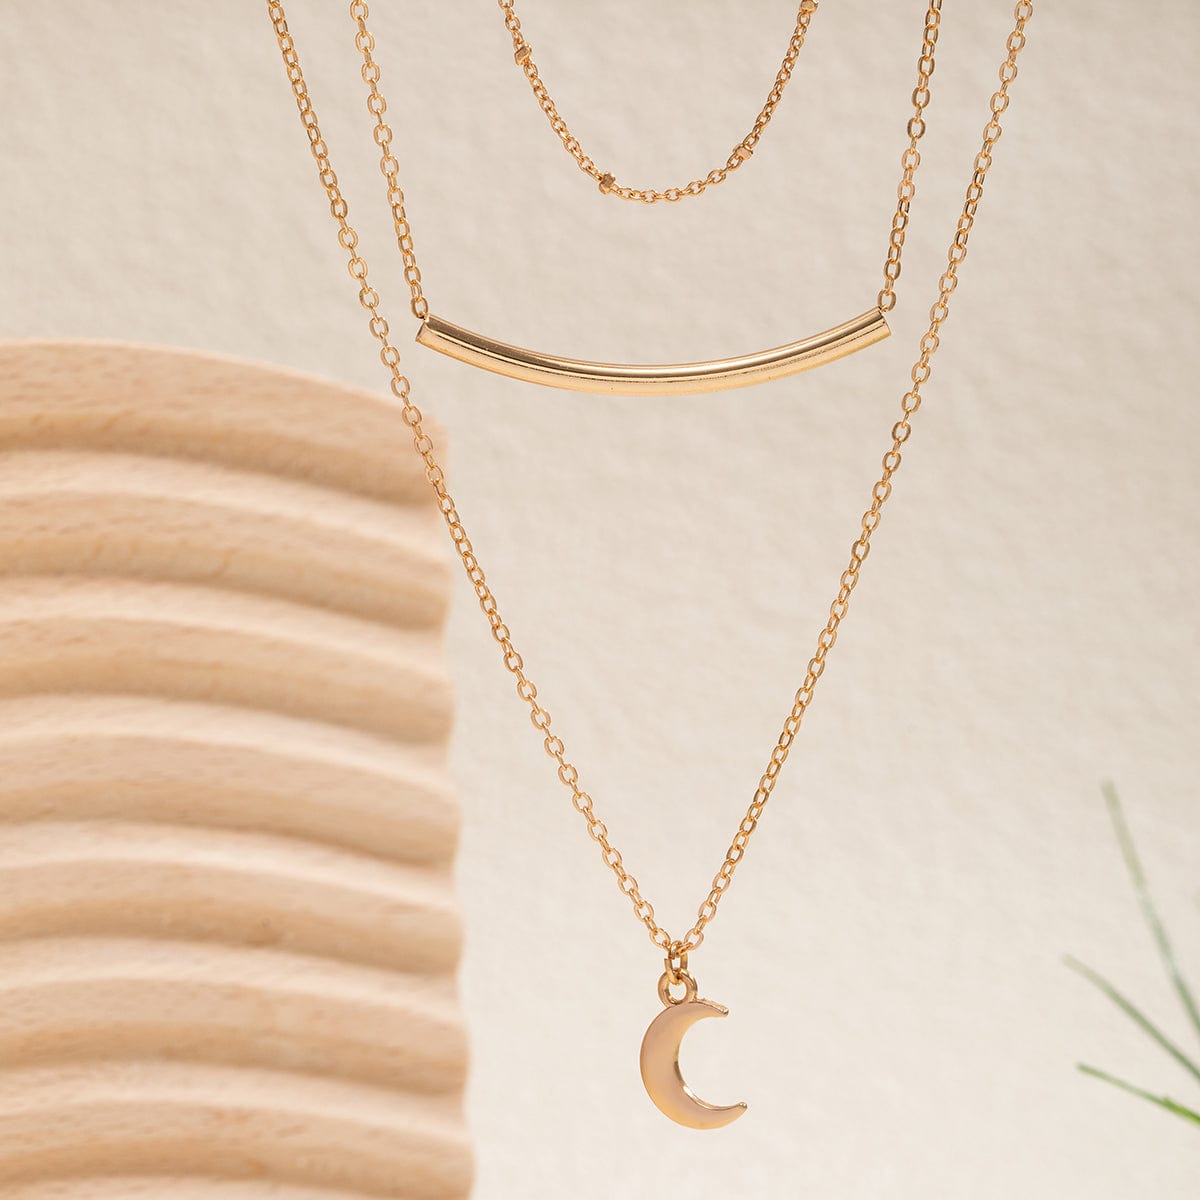 Trendy Layered Curved Bar Moon Pendant Cable Chain Necklace Set - ArtGalleryZen